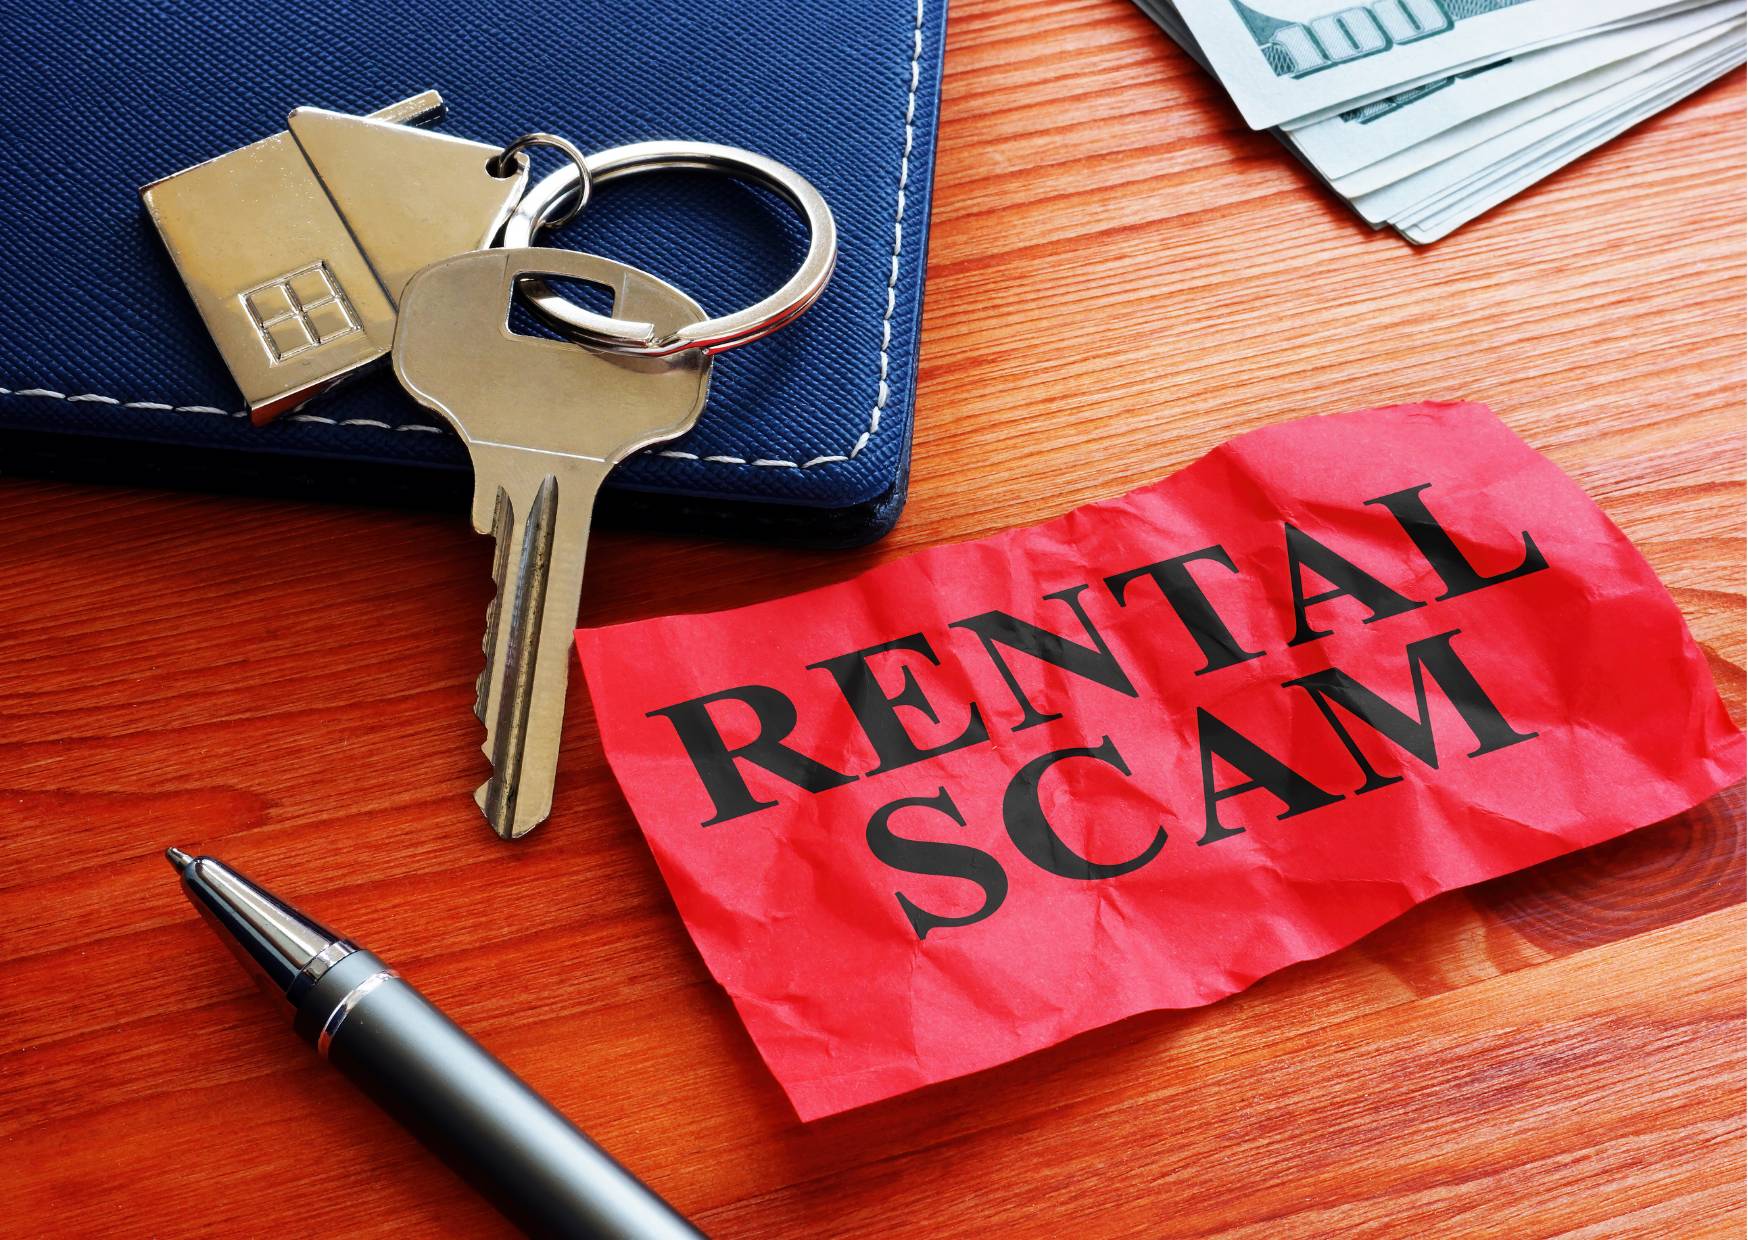 Learn how to avoid rental scams.